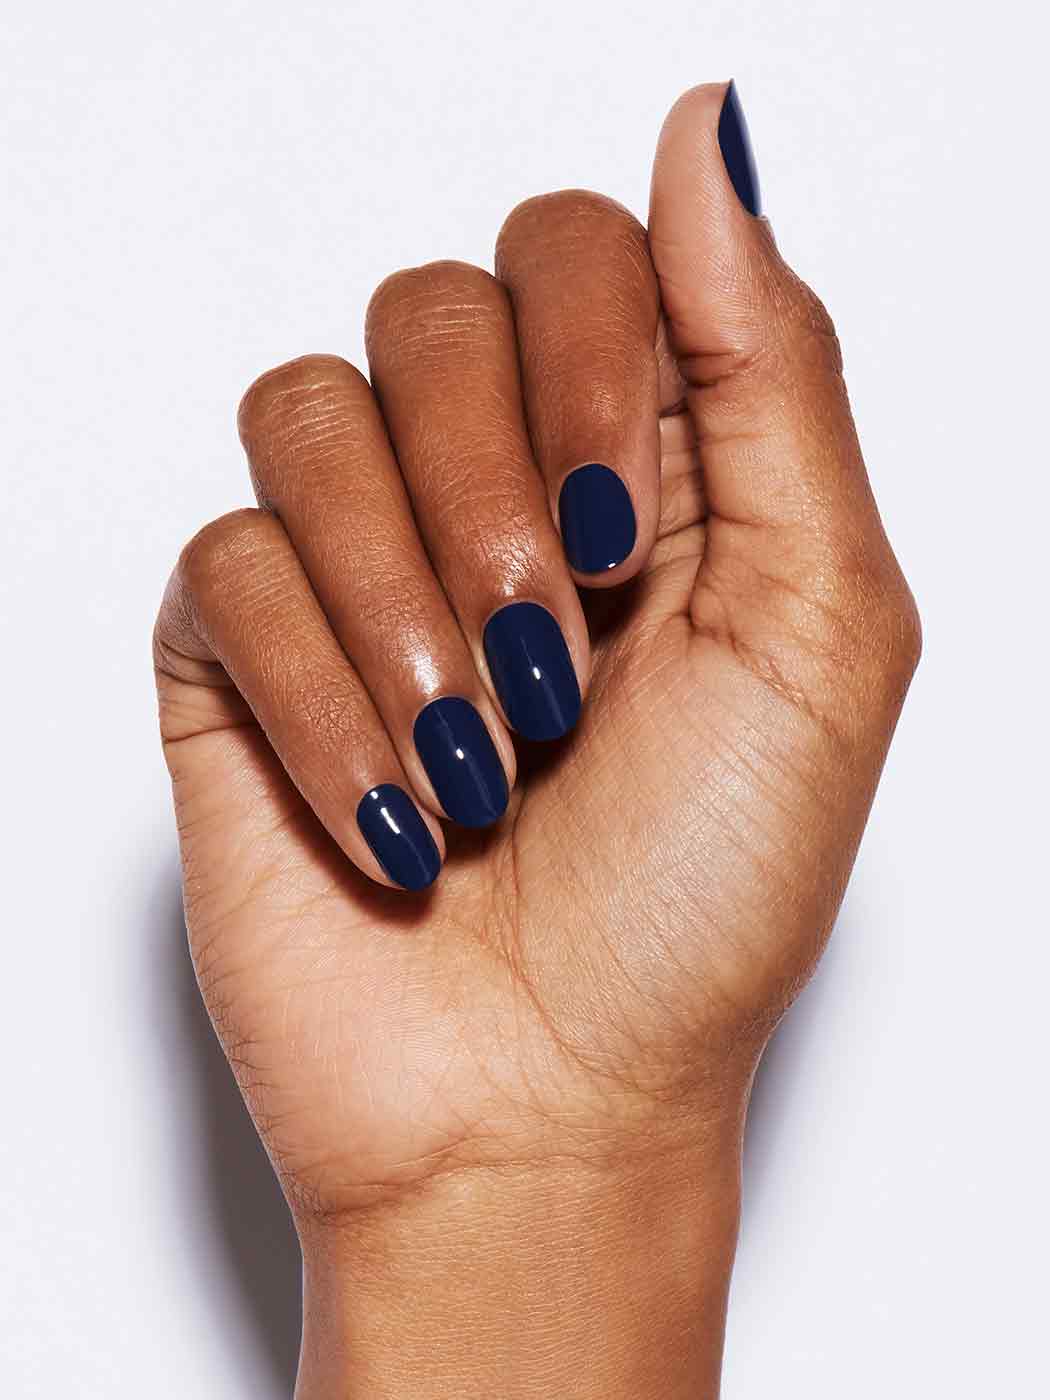 Navy and light blue nails | Nails, Light blue nails, How to do nails